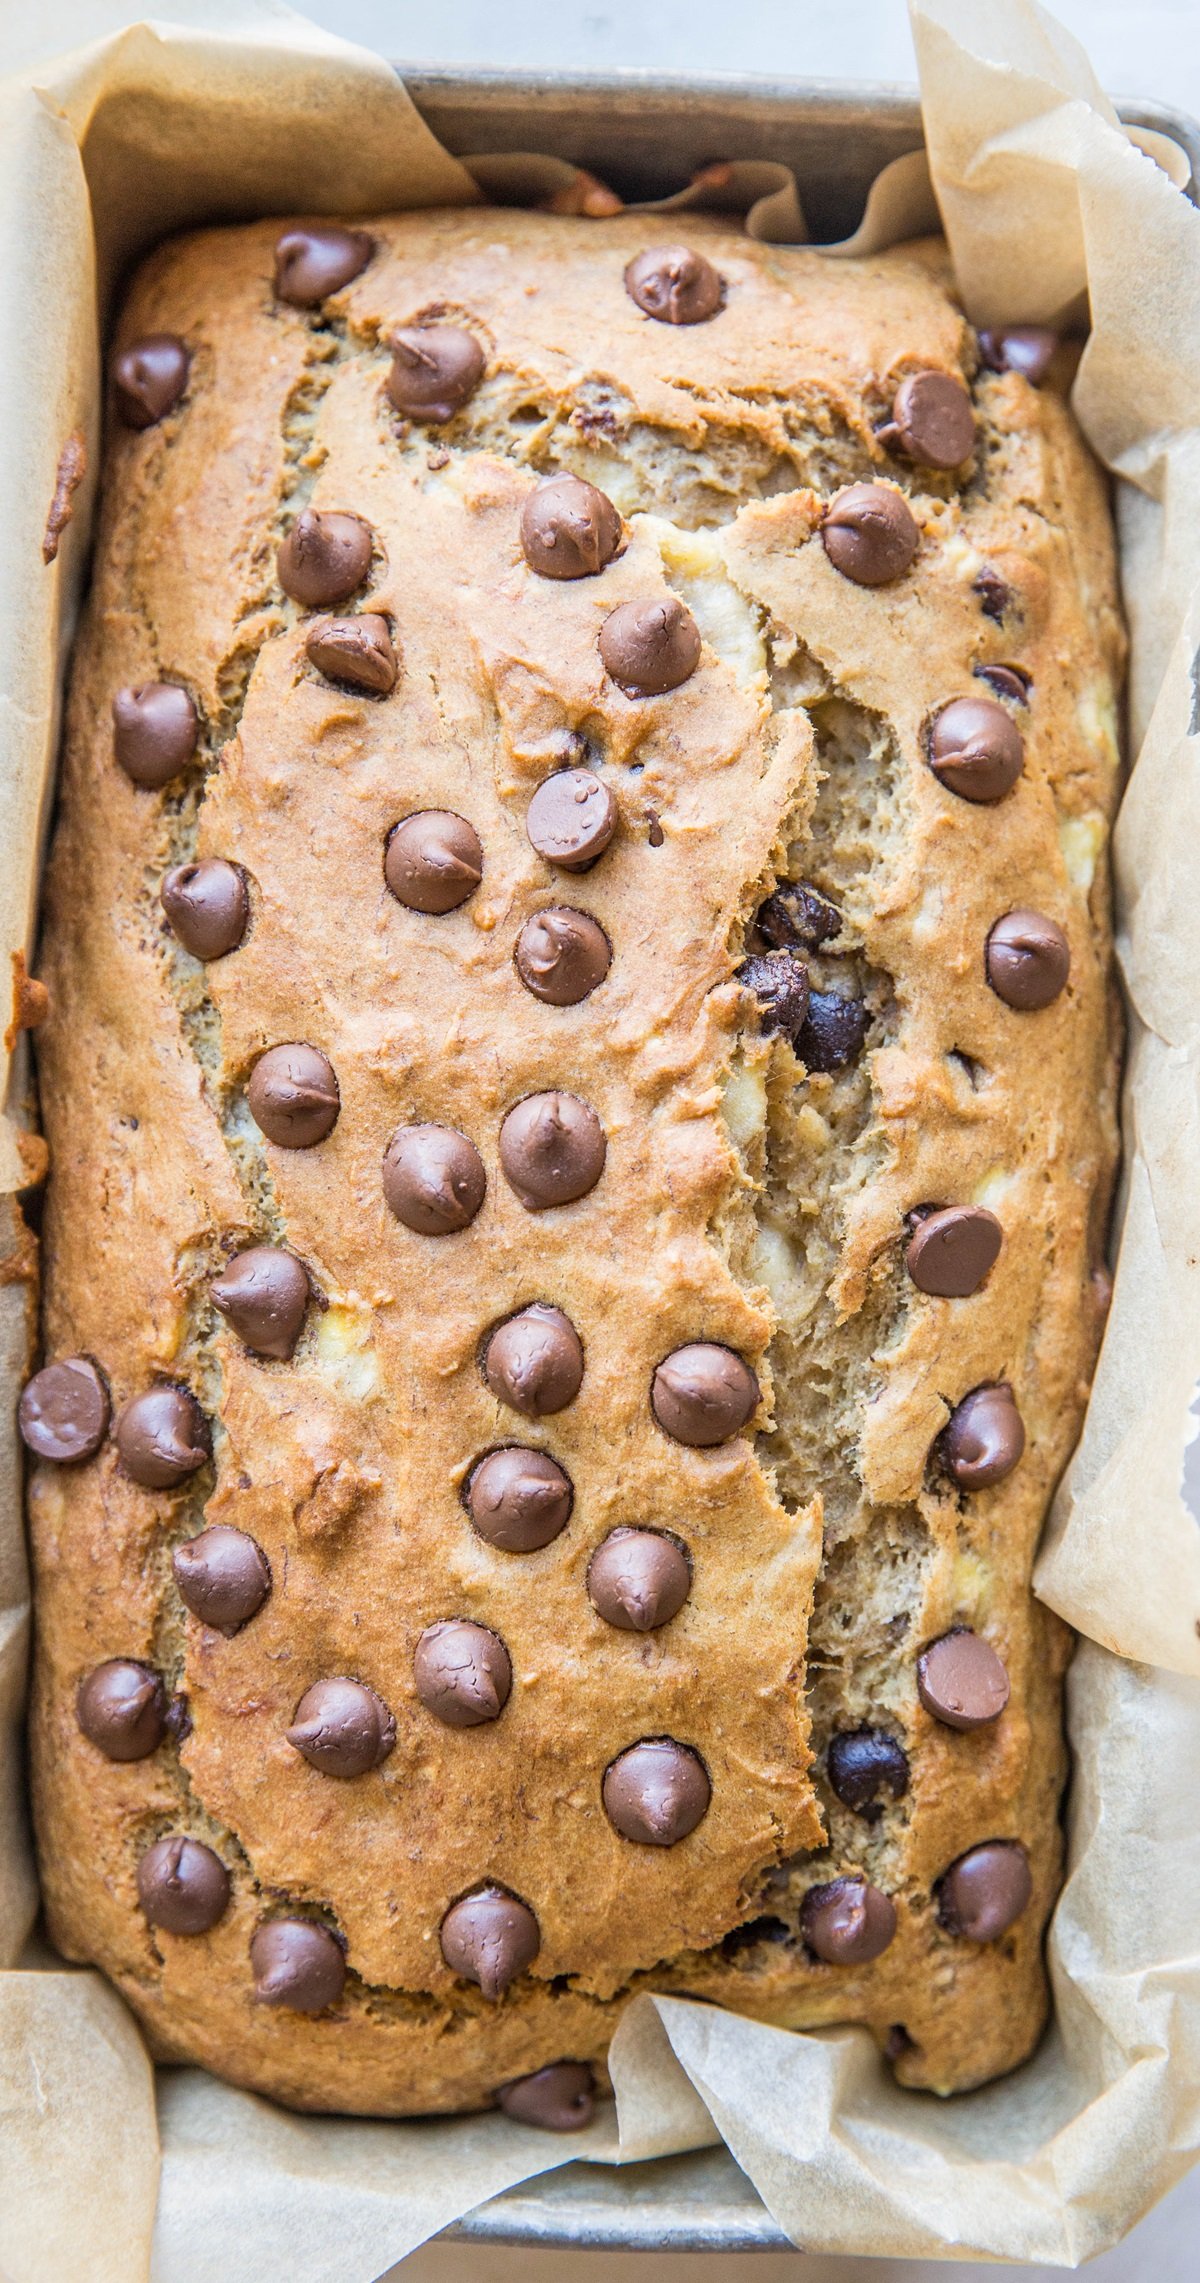 Healthy Gluten-Free Banana Bread - perfectly moist and fluffy banana bread recipe with chocolate chips